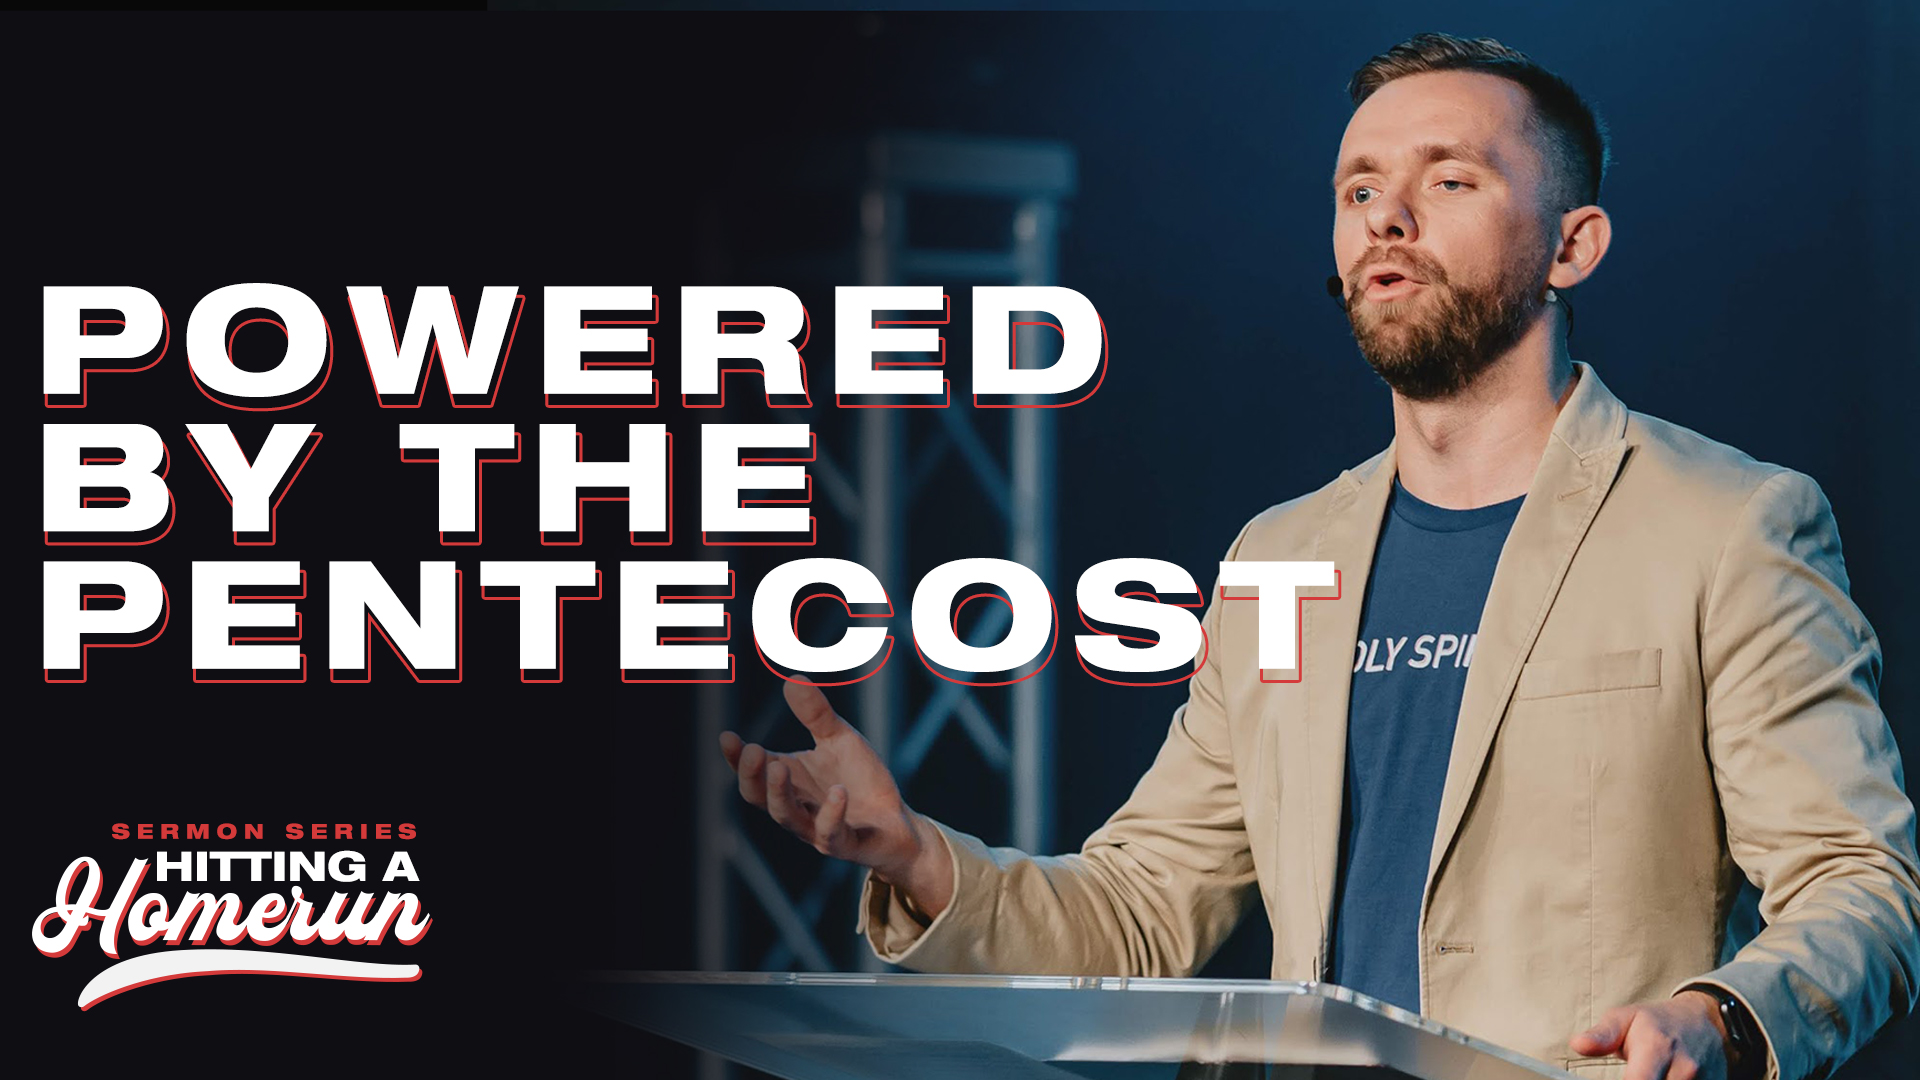 Featured image for “Powered by the Pentecost”